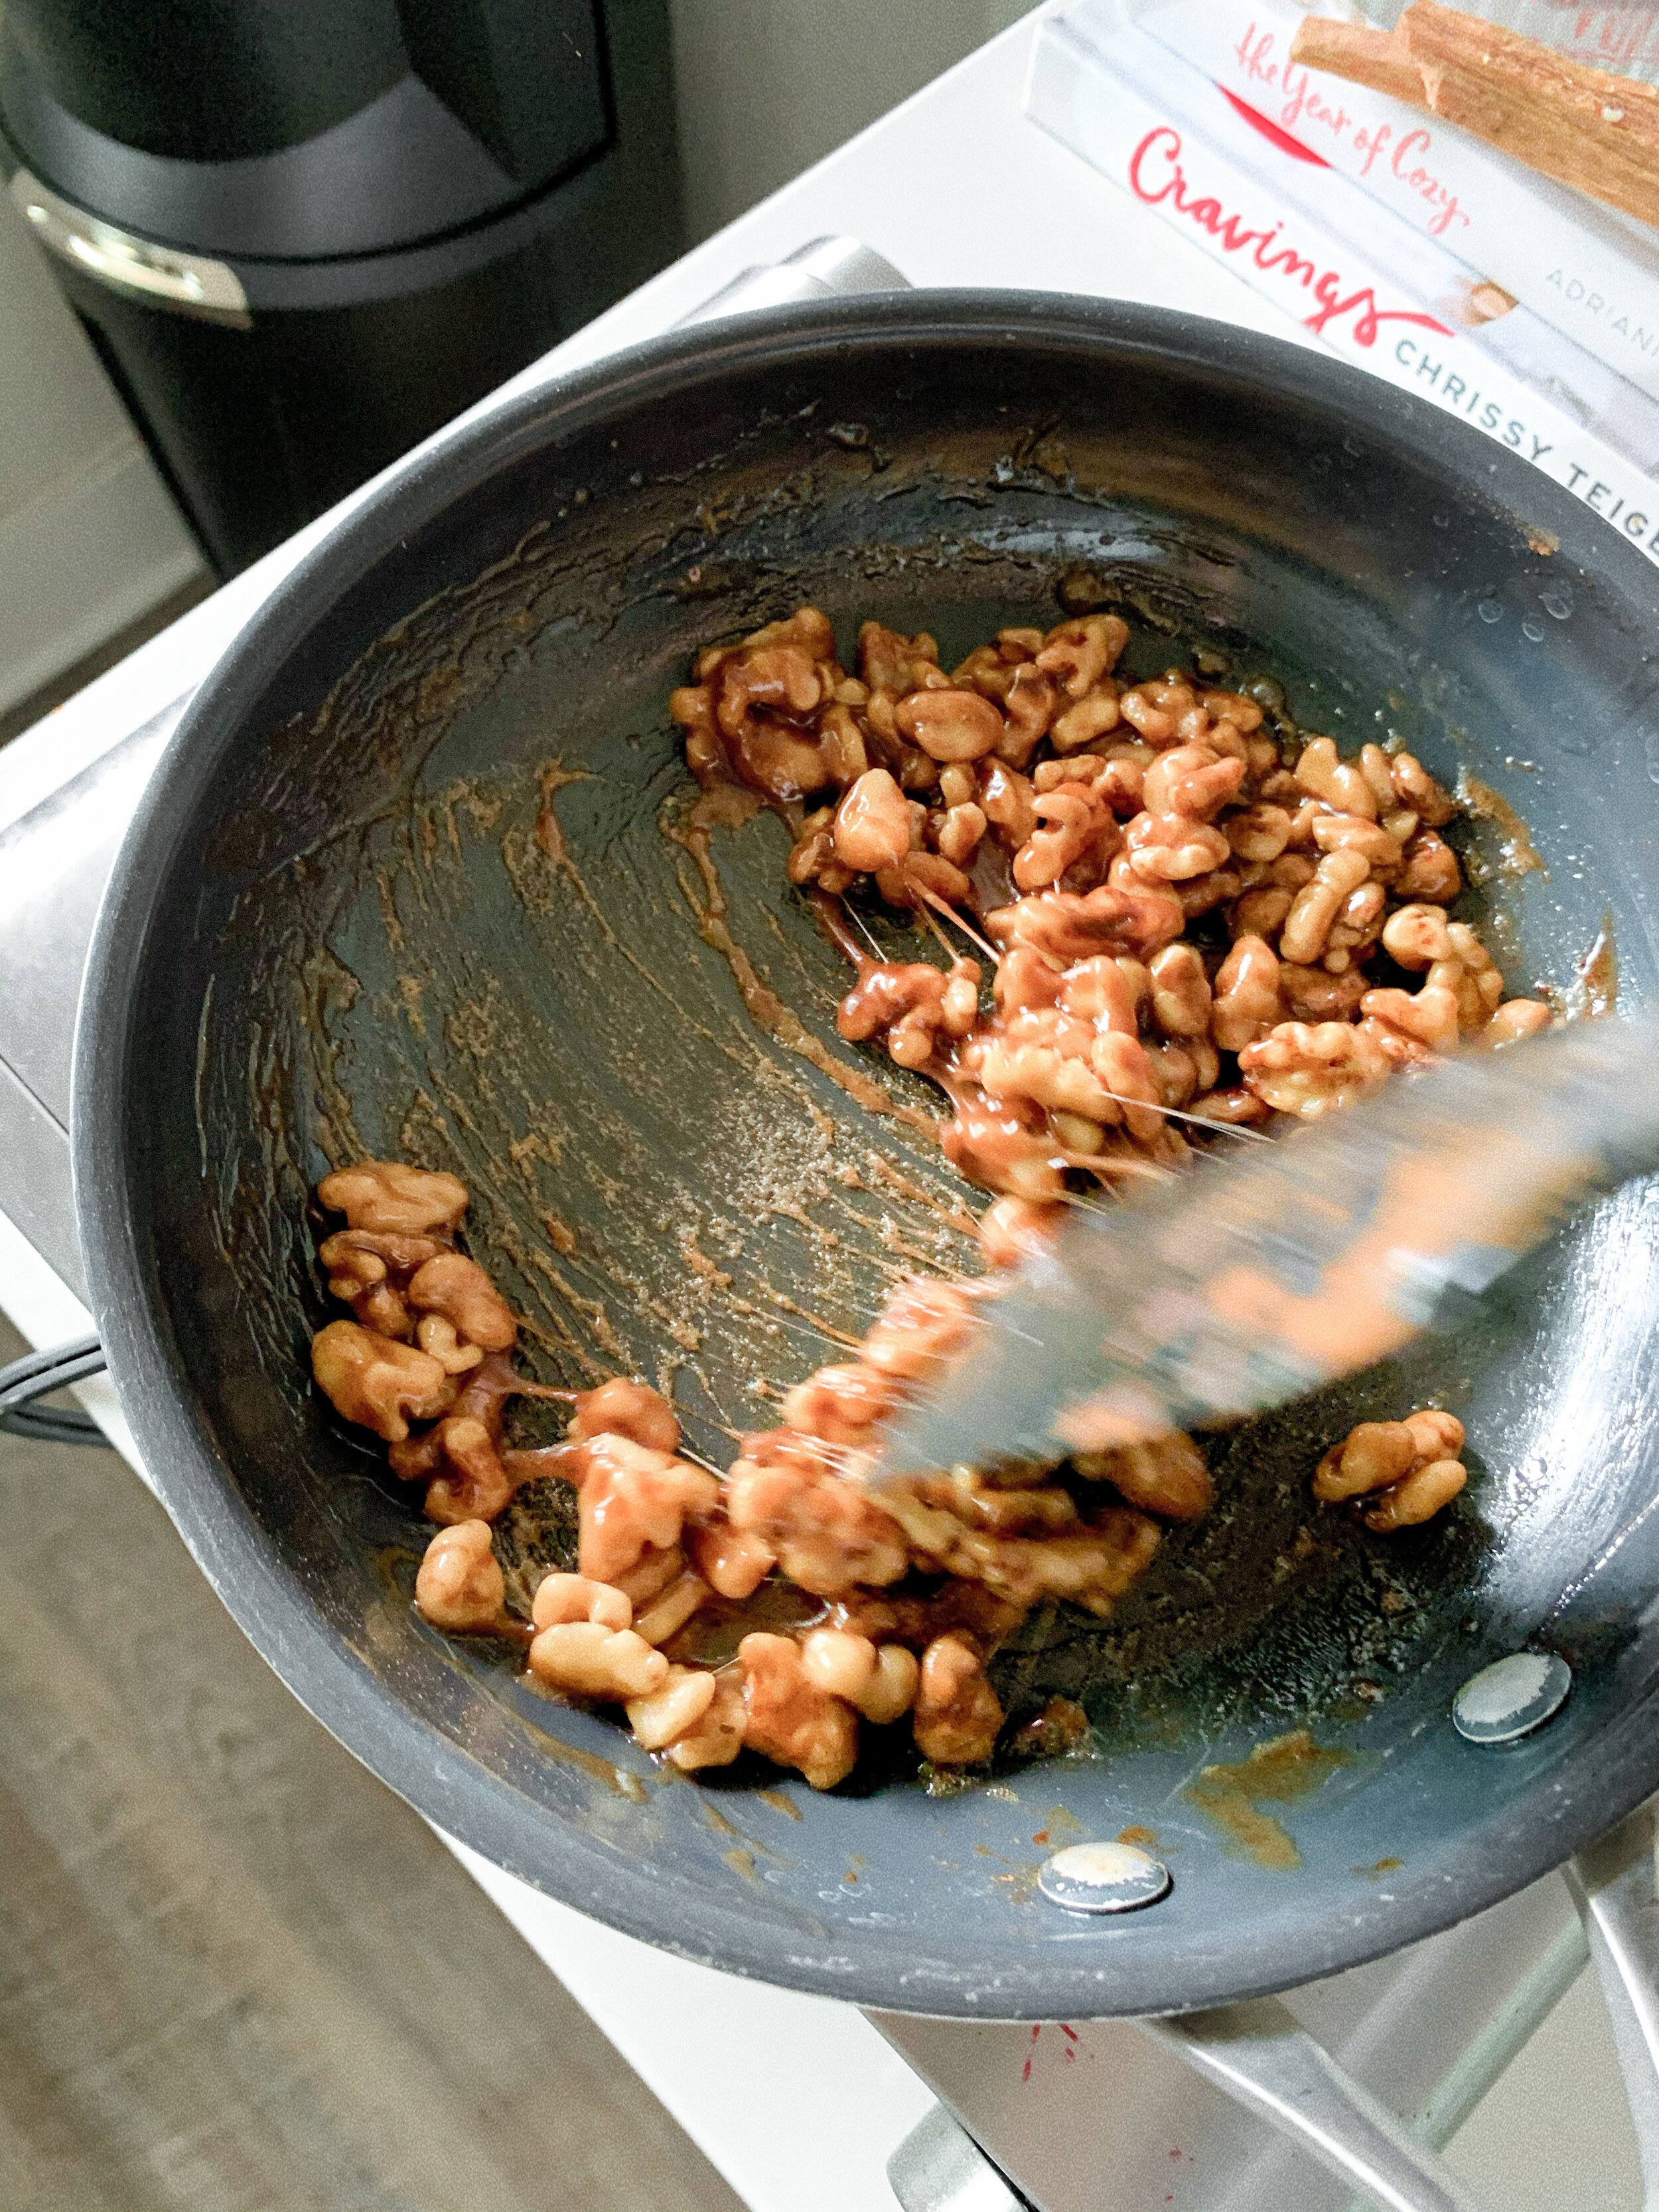 Making the candied walnuts in a separate saucepan